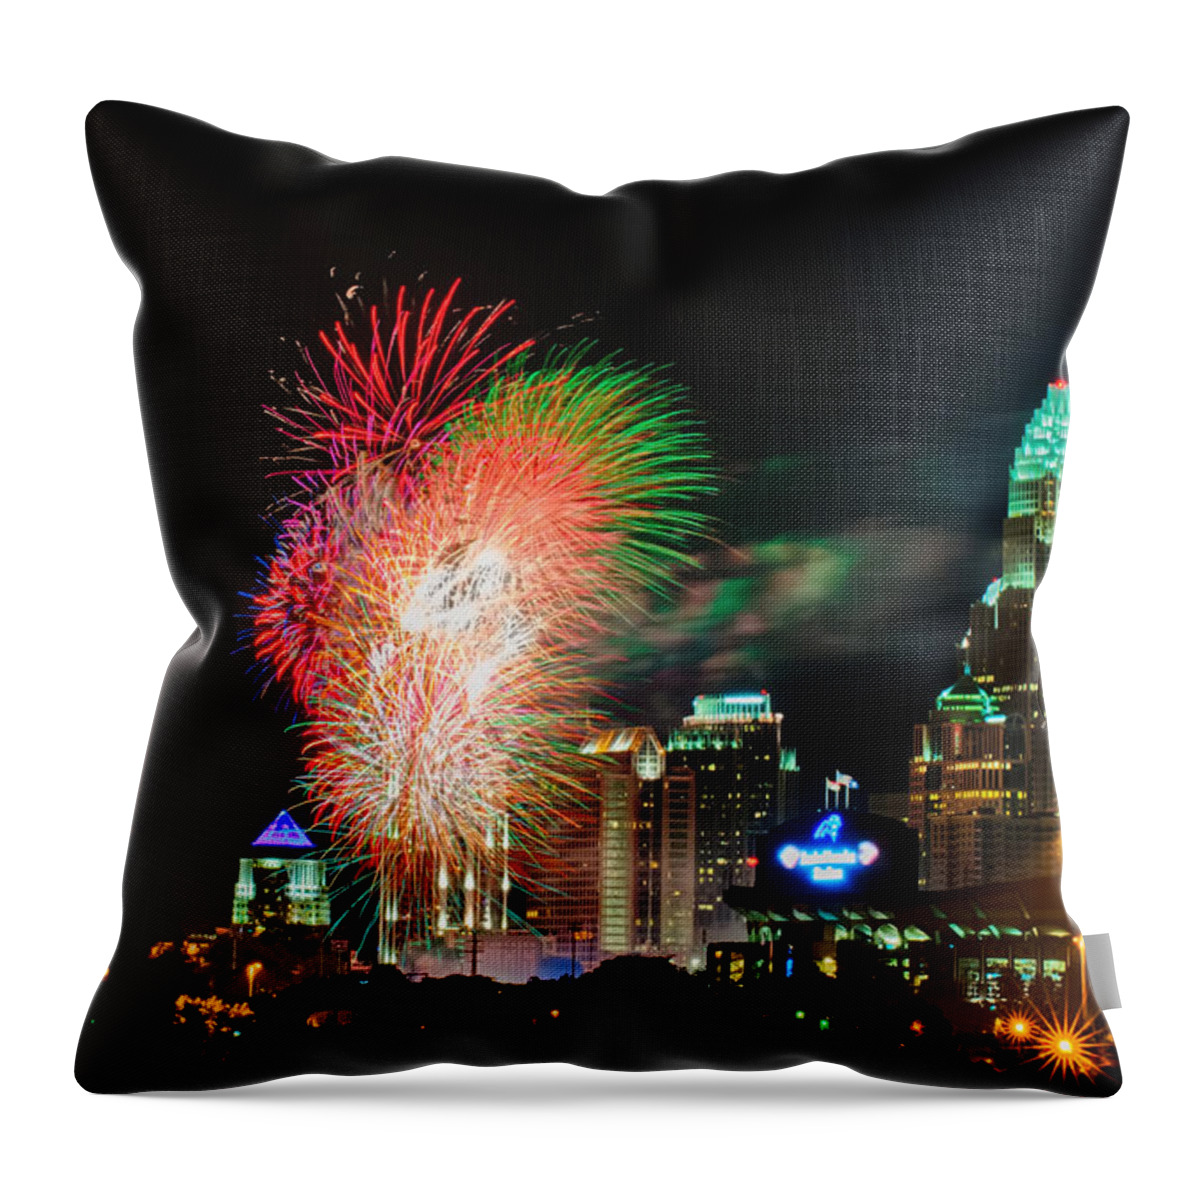 Carolina Throw Pillow featuring the photograph 4th Of July Firework Over Charlotte Skyline by Alex Grichenko